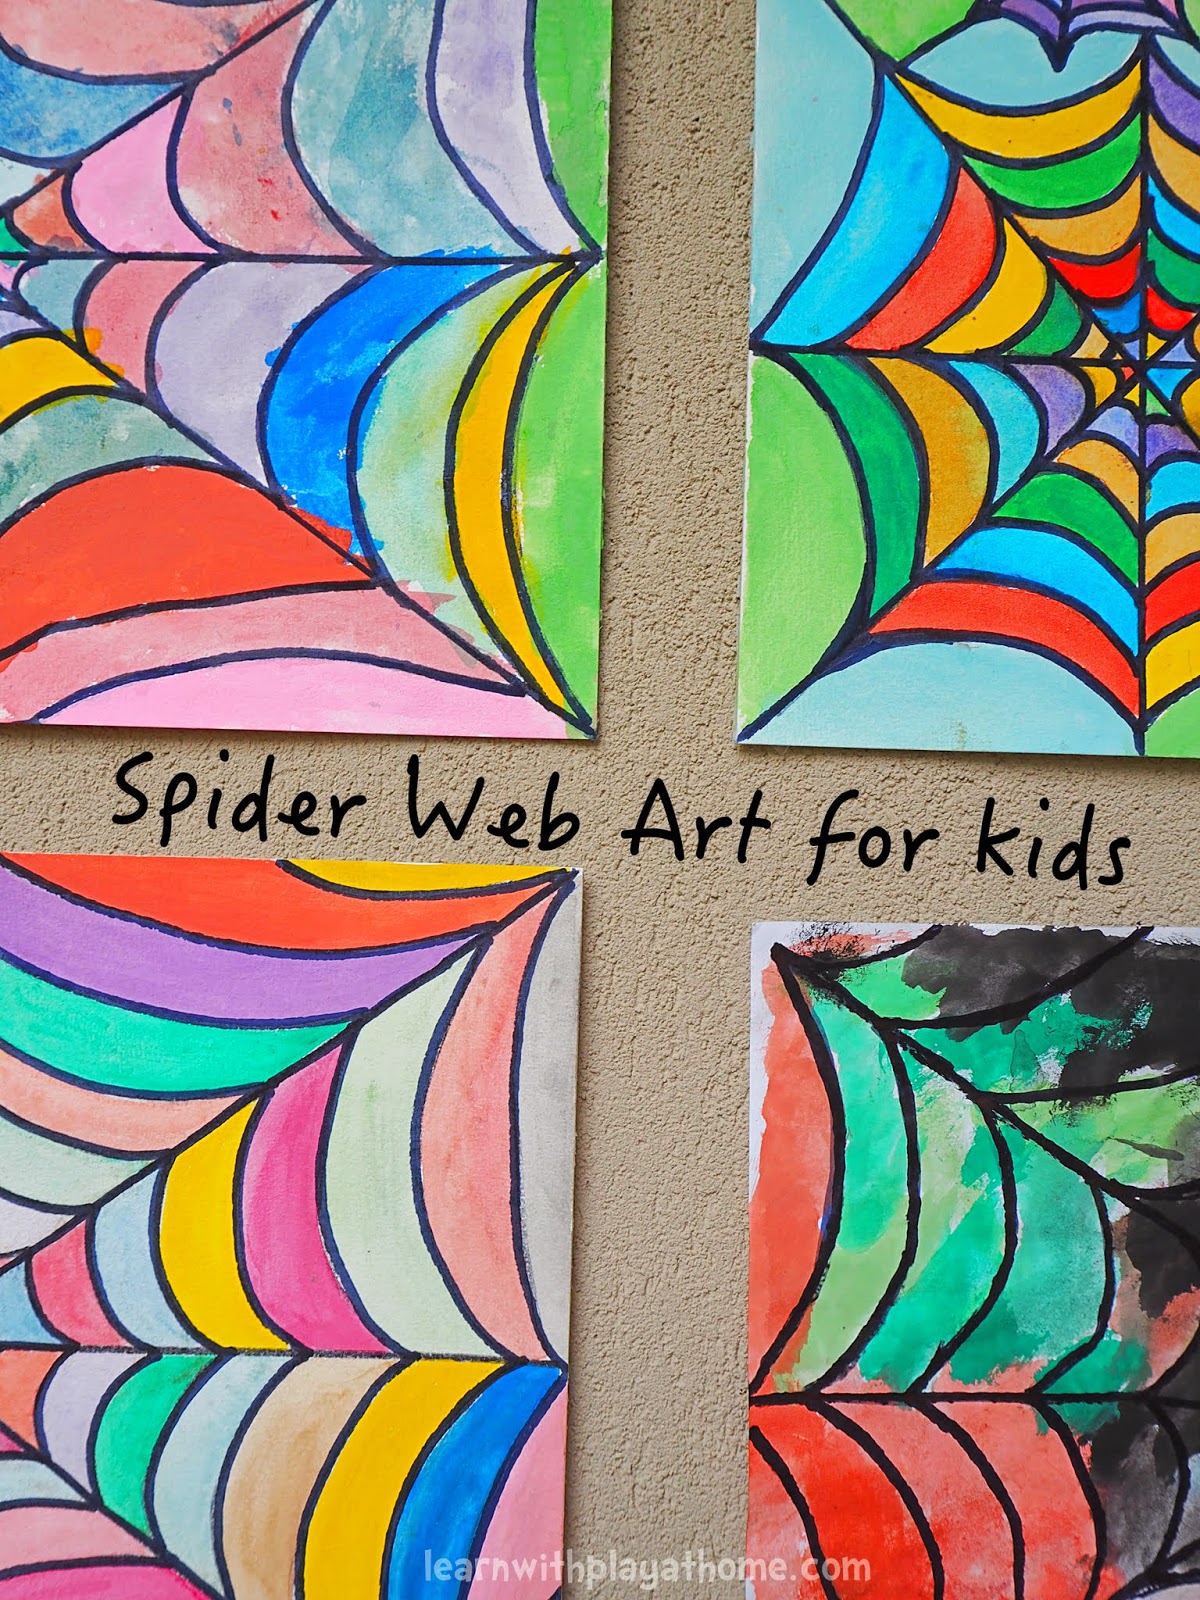 Learn with Play at Home: Spider Web Art for Kids